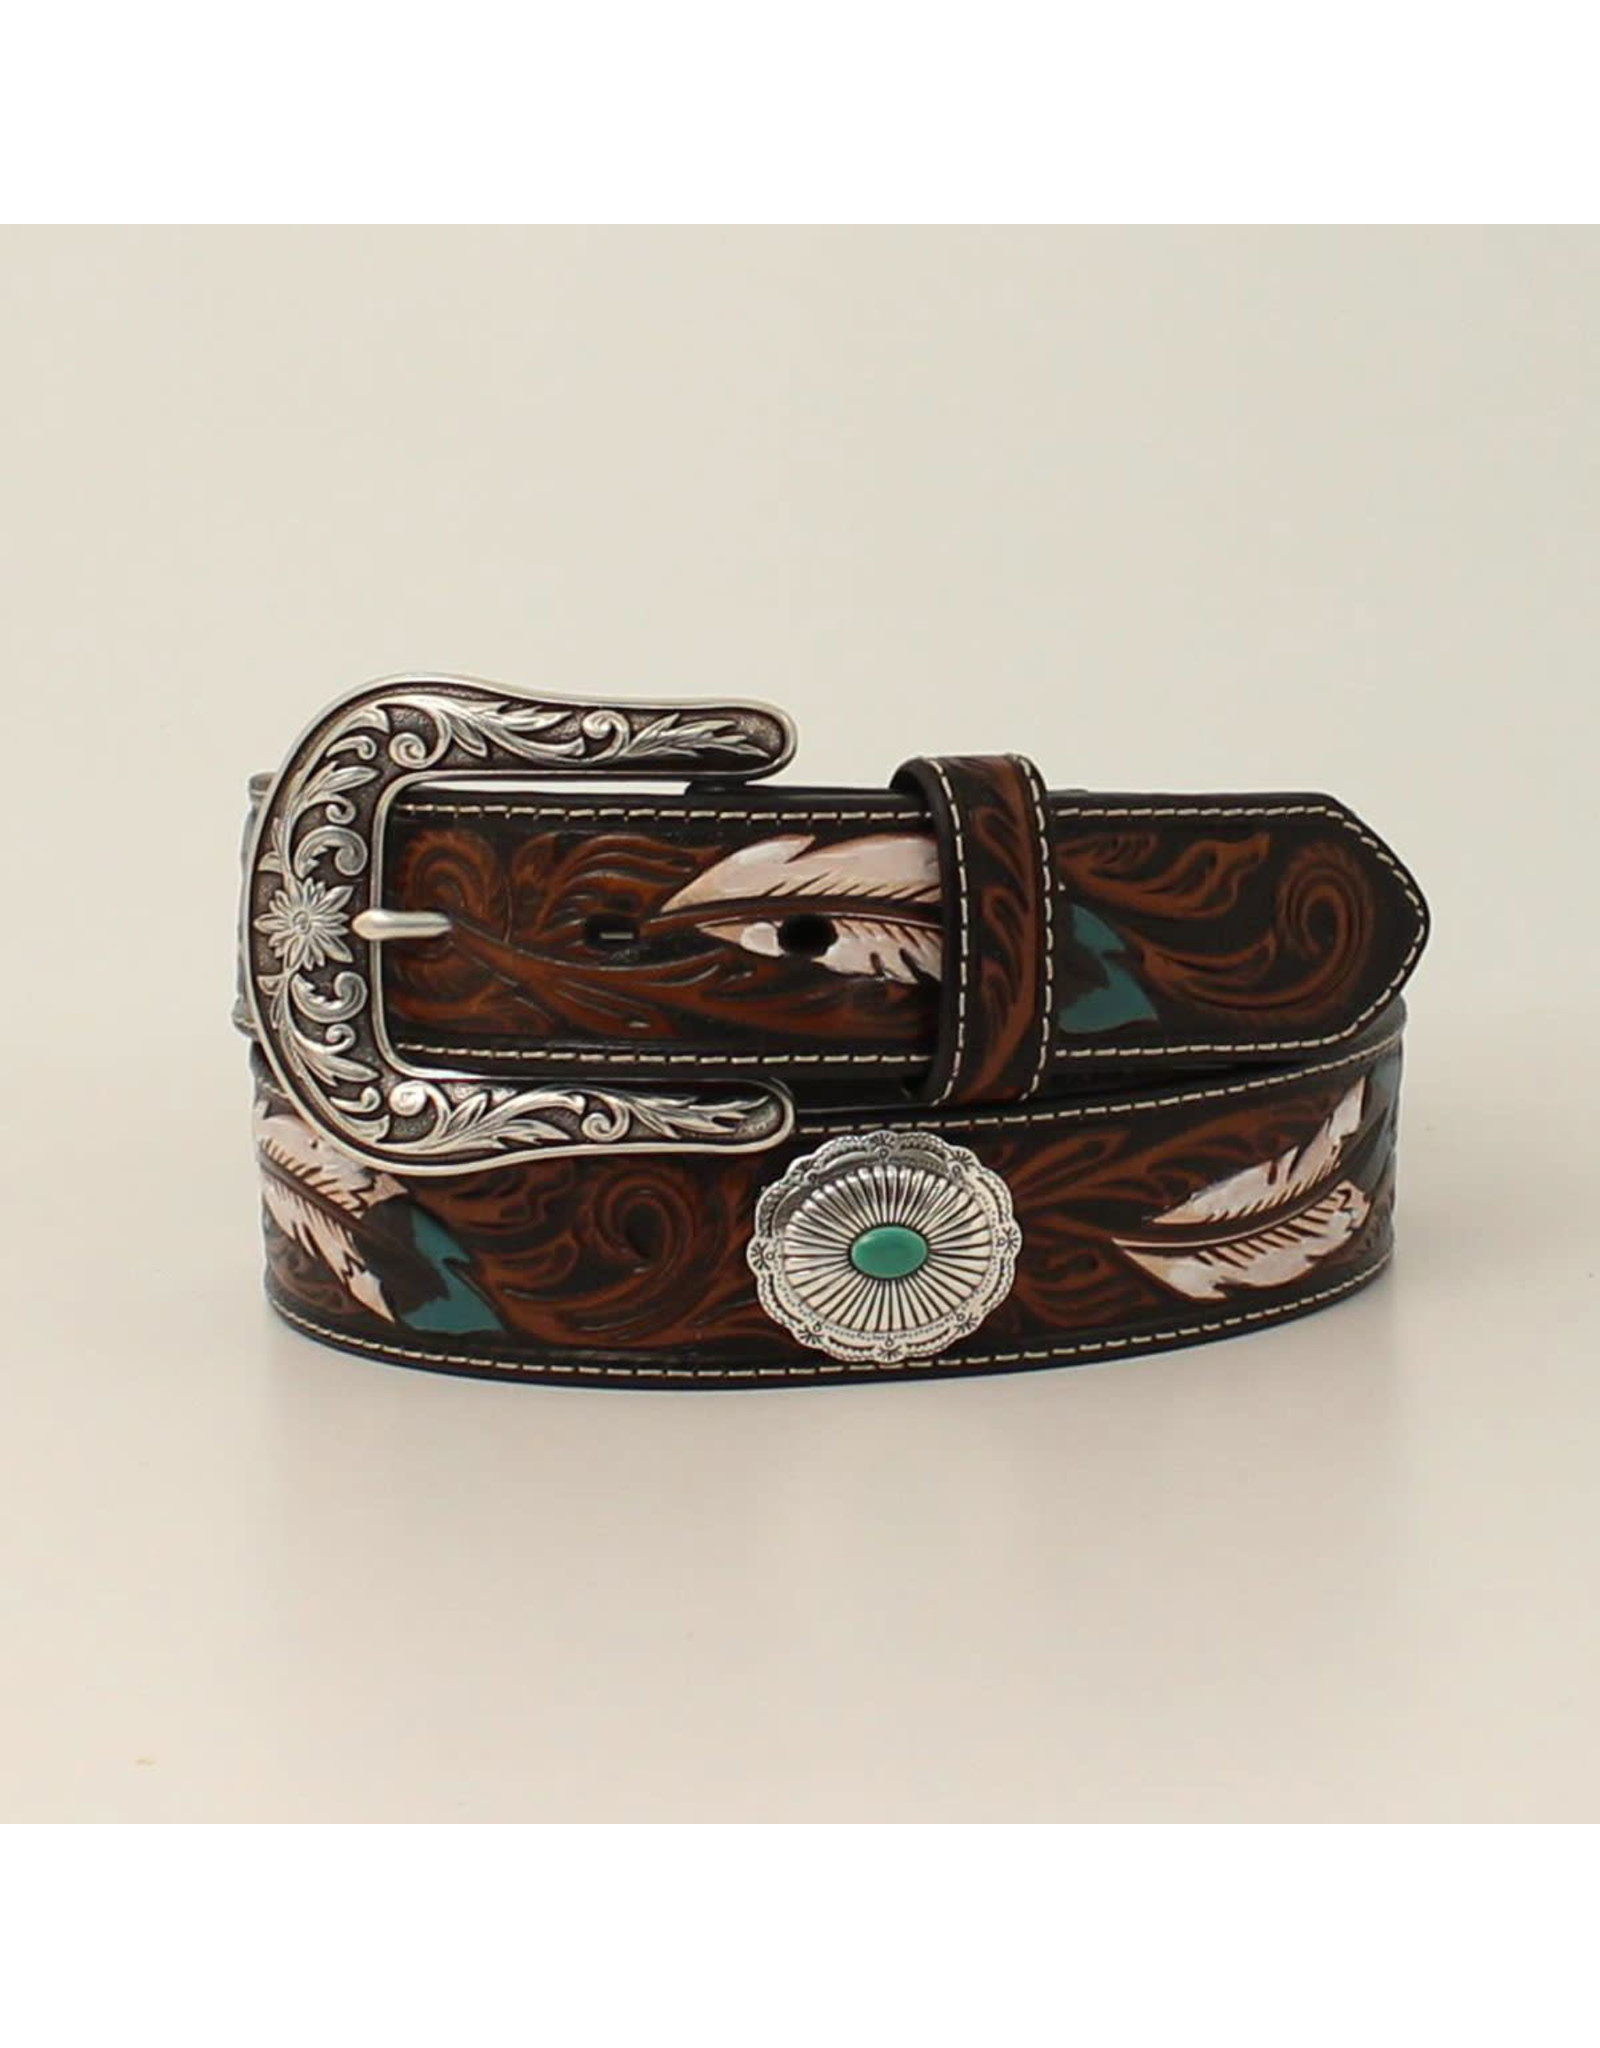 Ariat Ladies 1 1/2” Feather Flower Embossed Oval Concho Belt A1533602